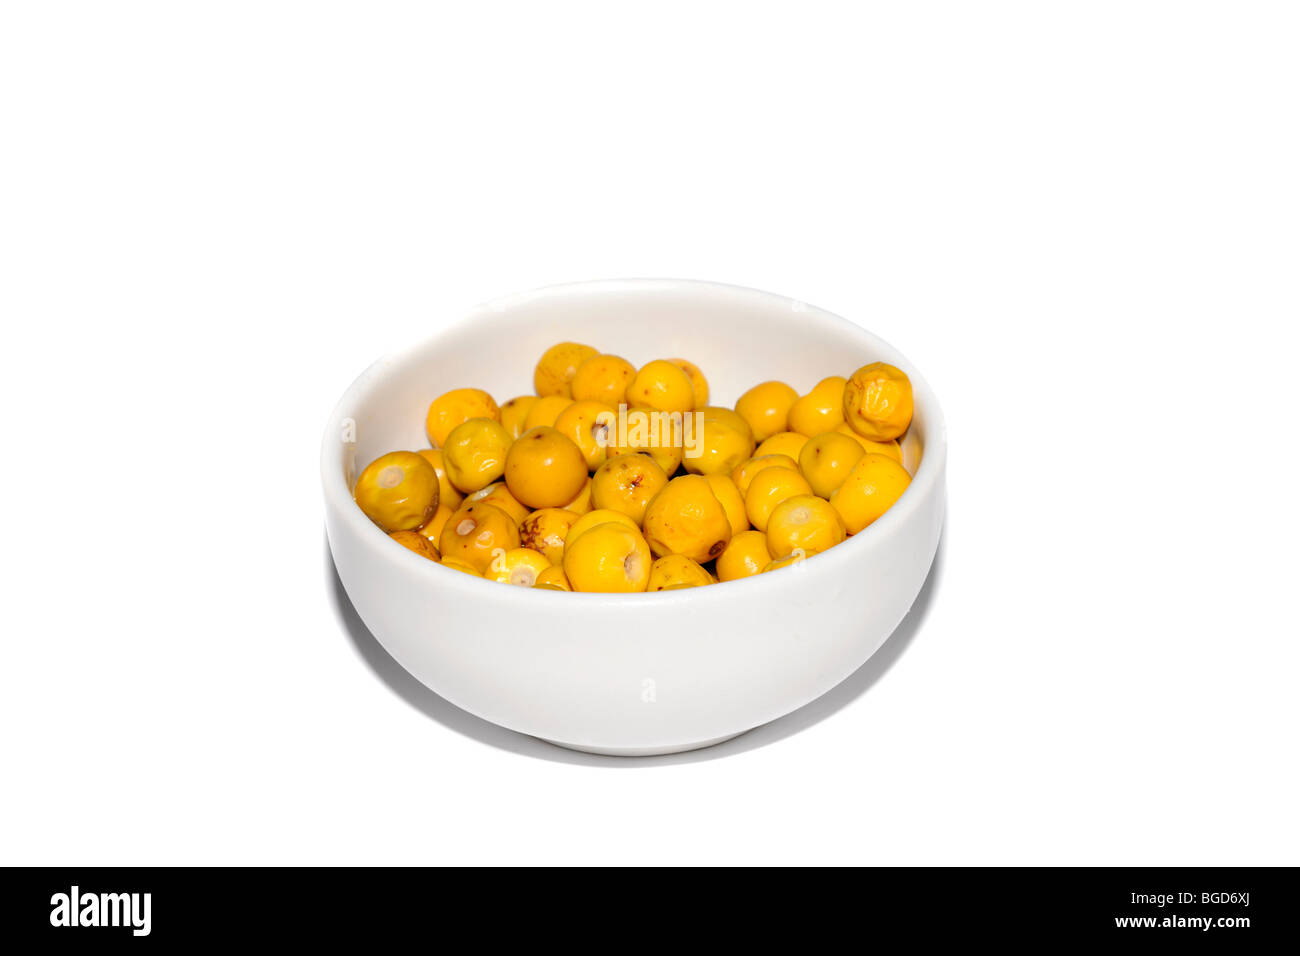 Murici (Byrsonima verbacifolia ) fruit in a bowl on white background Stock Photo